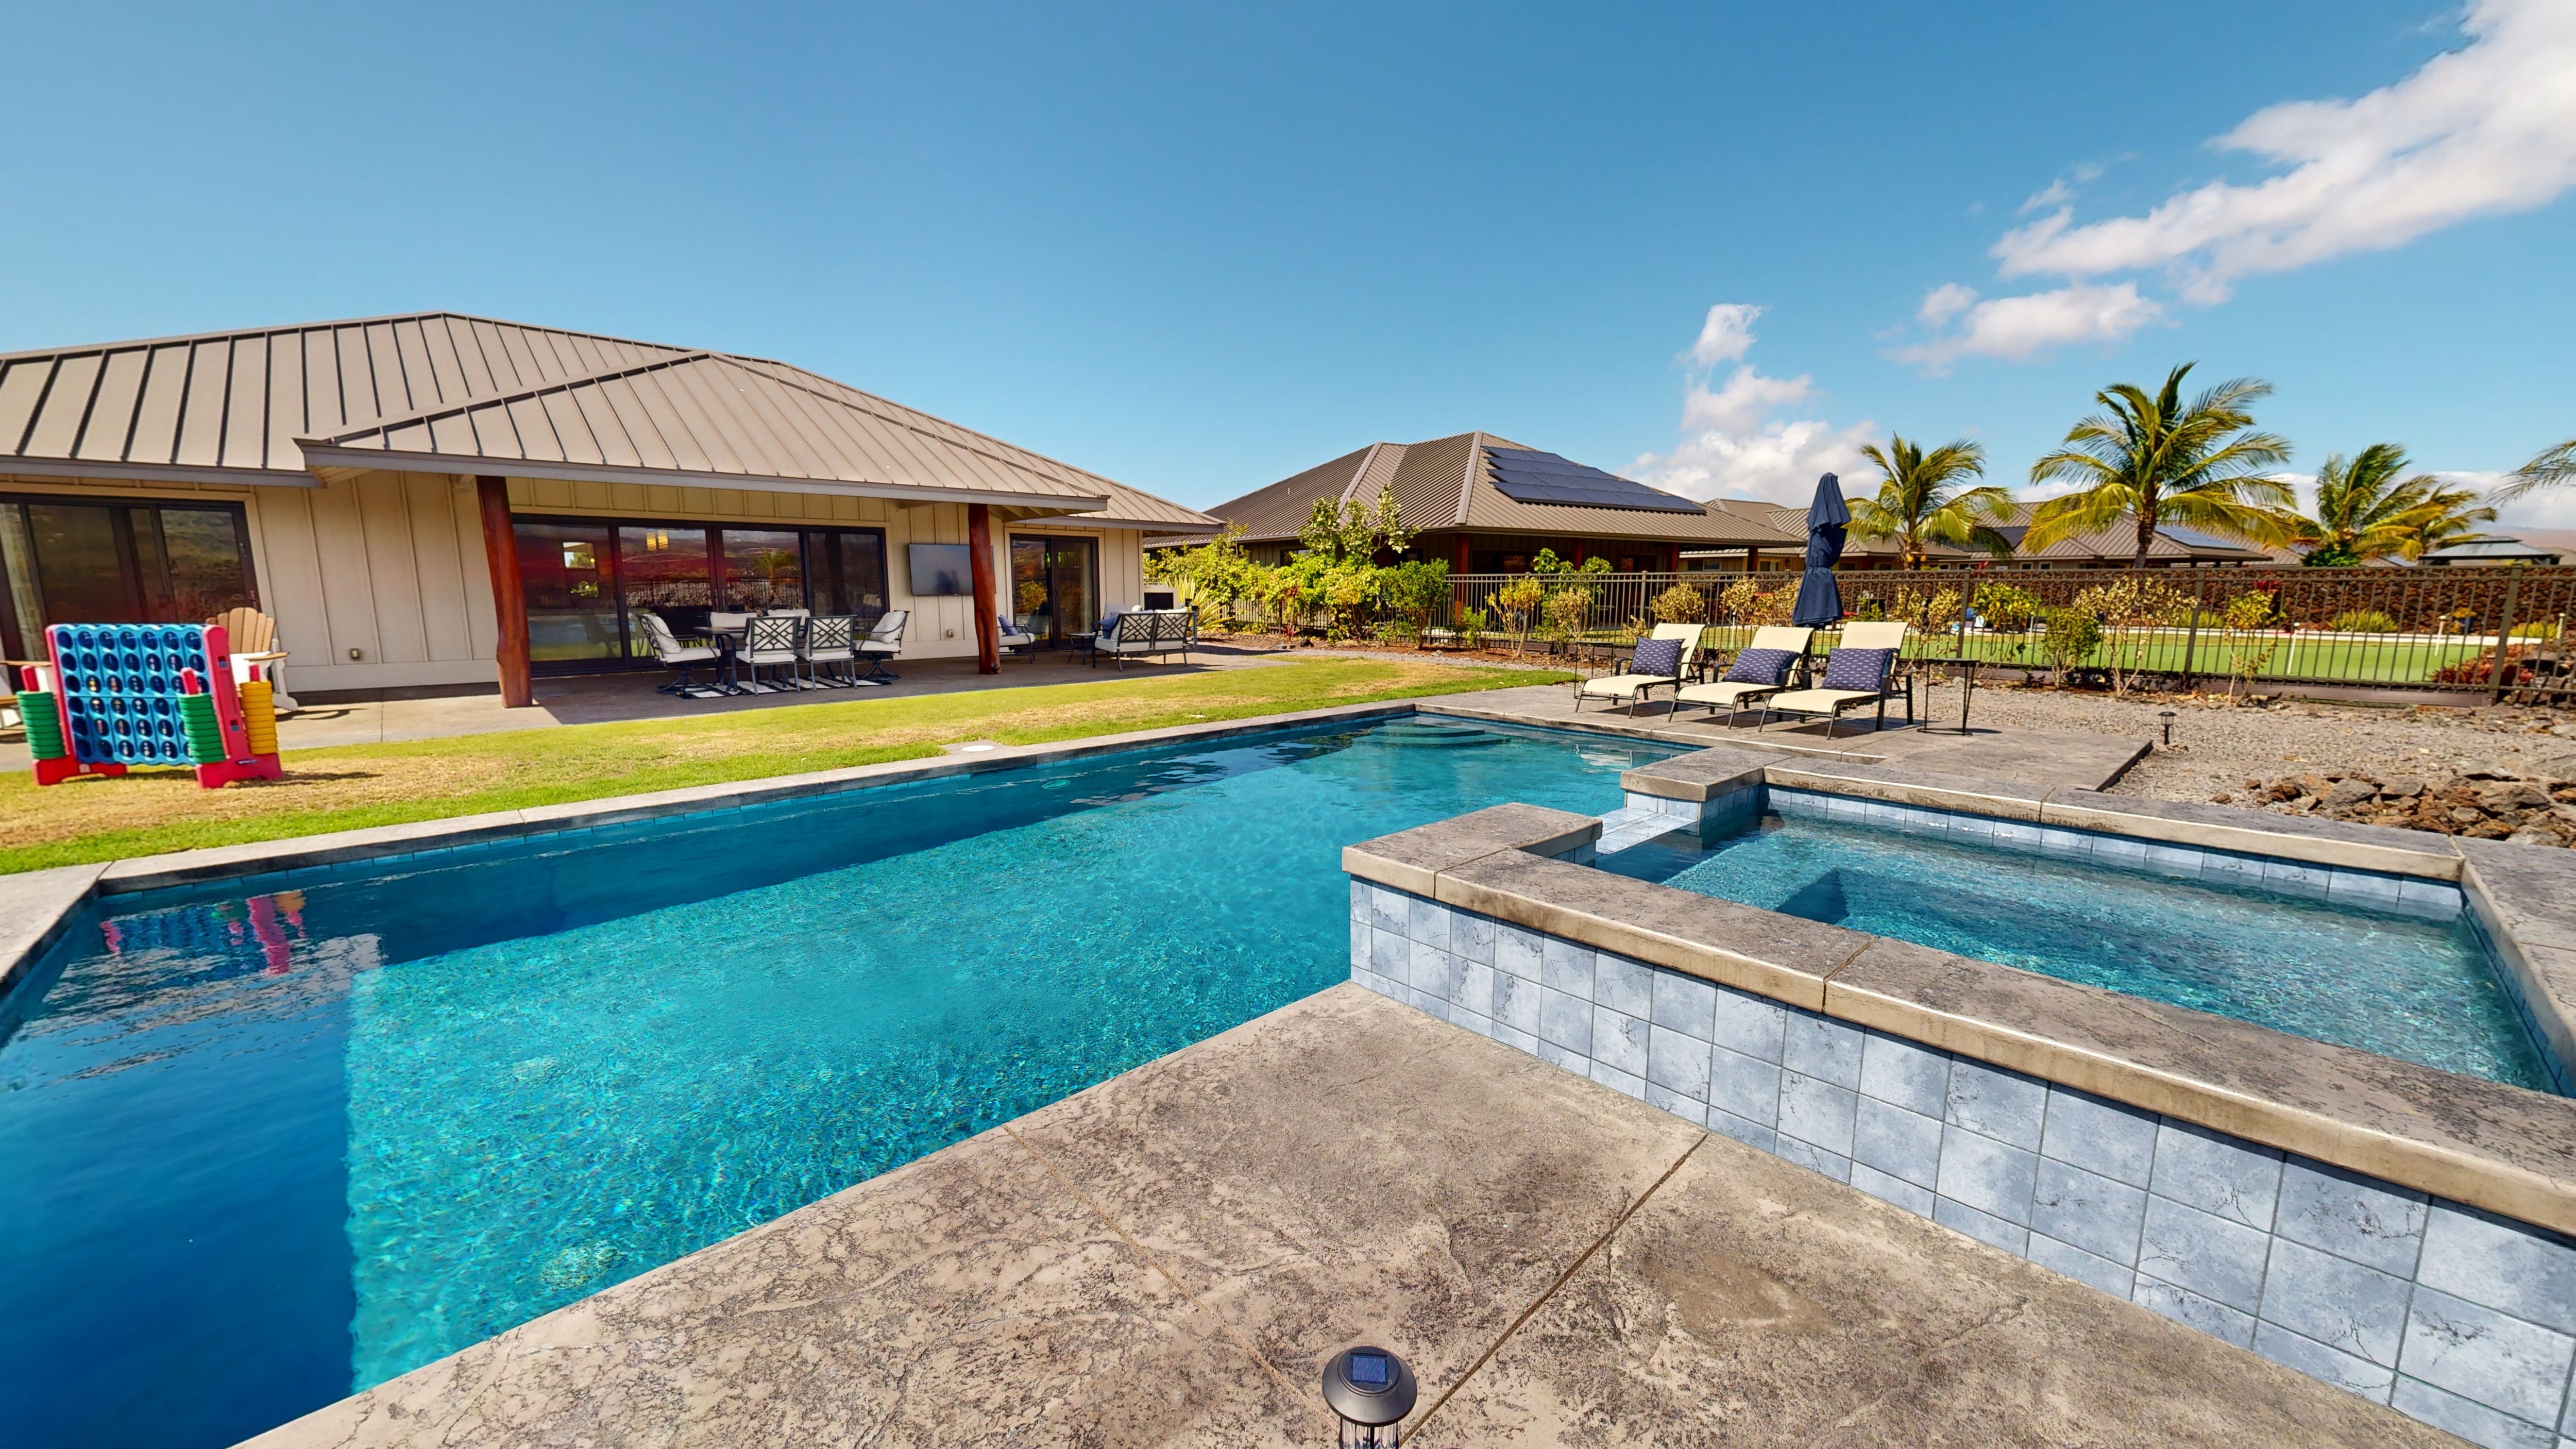 Soak up the sun by the private pool